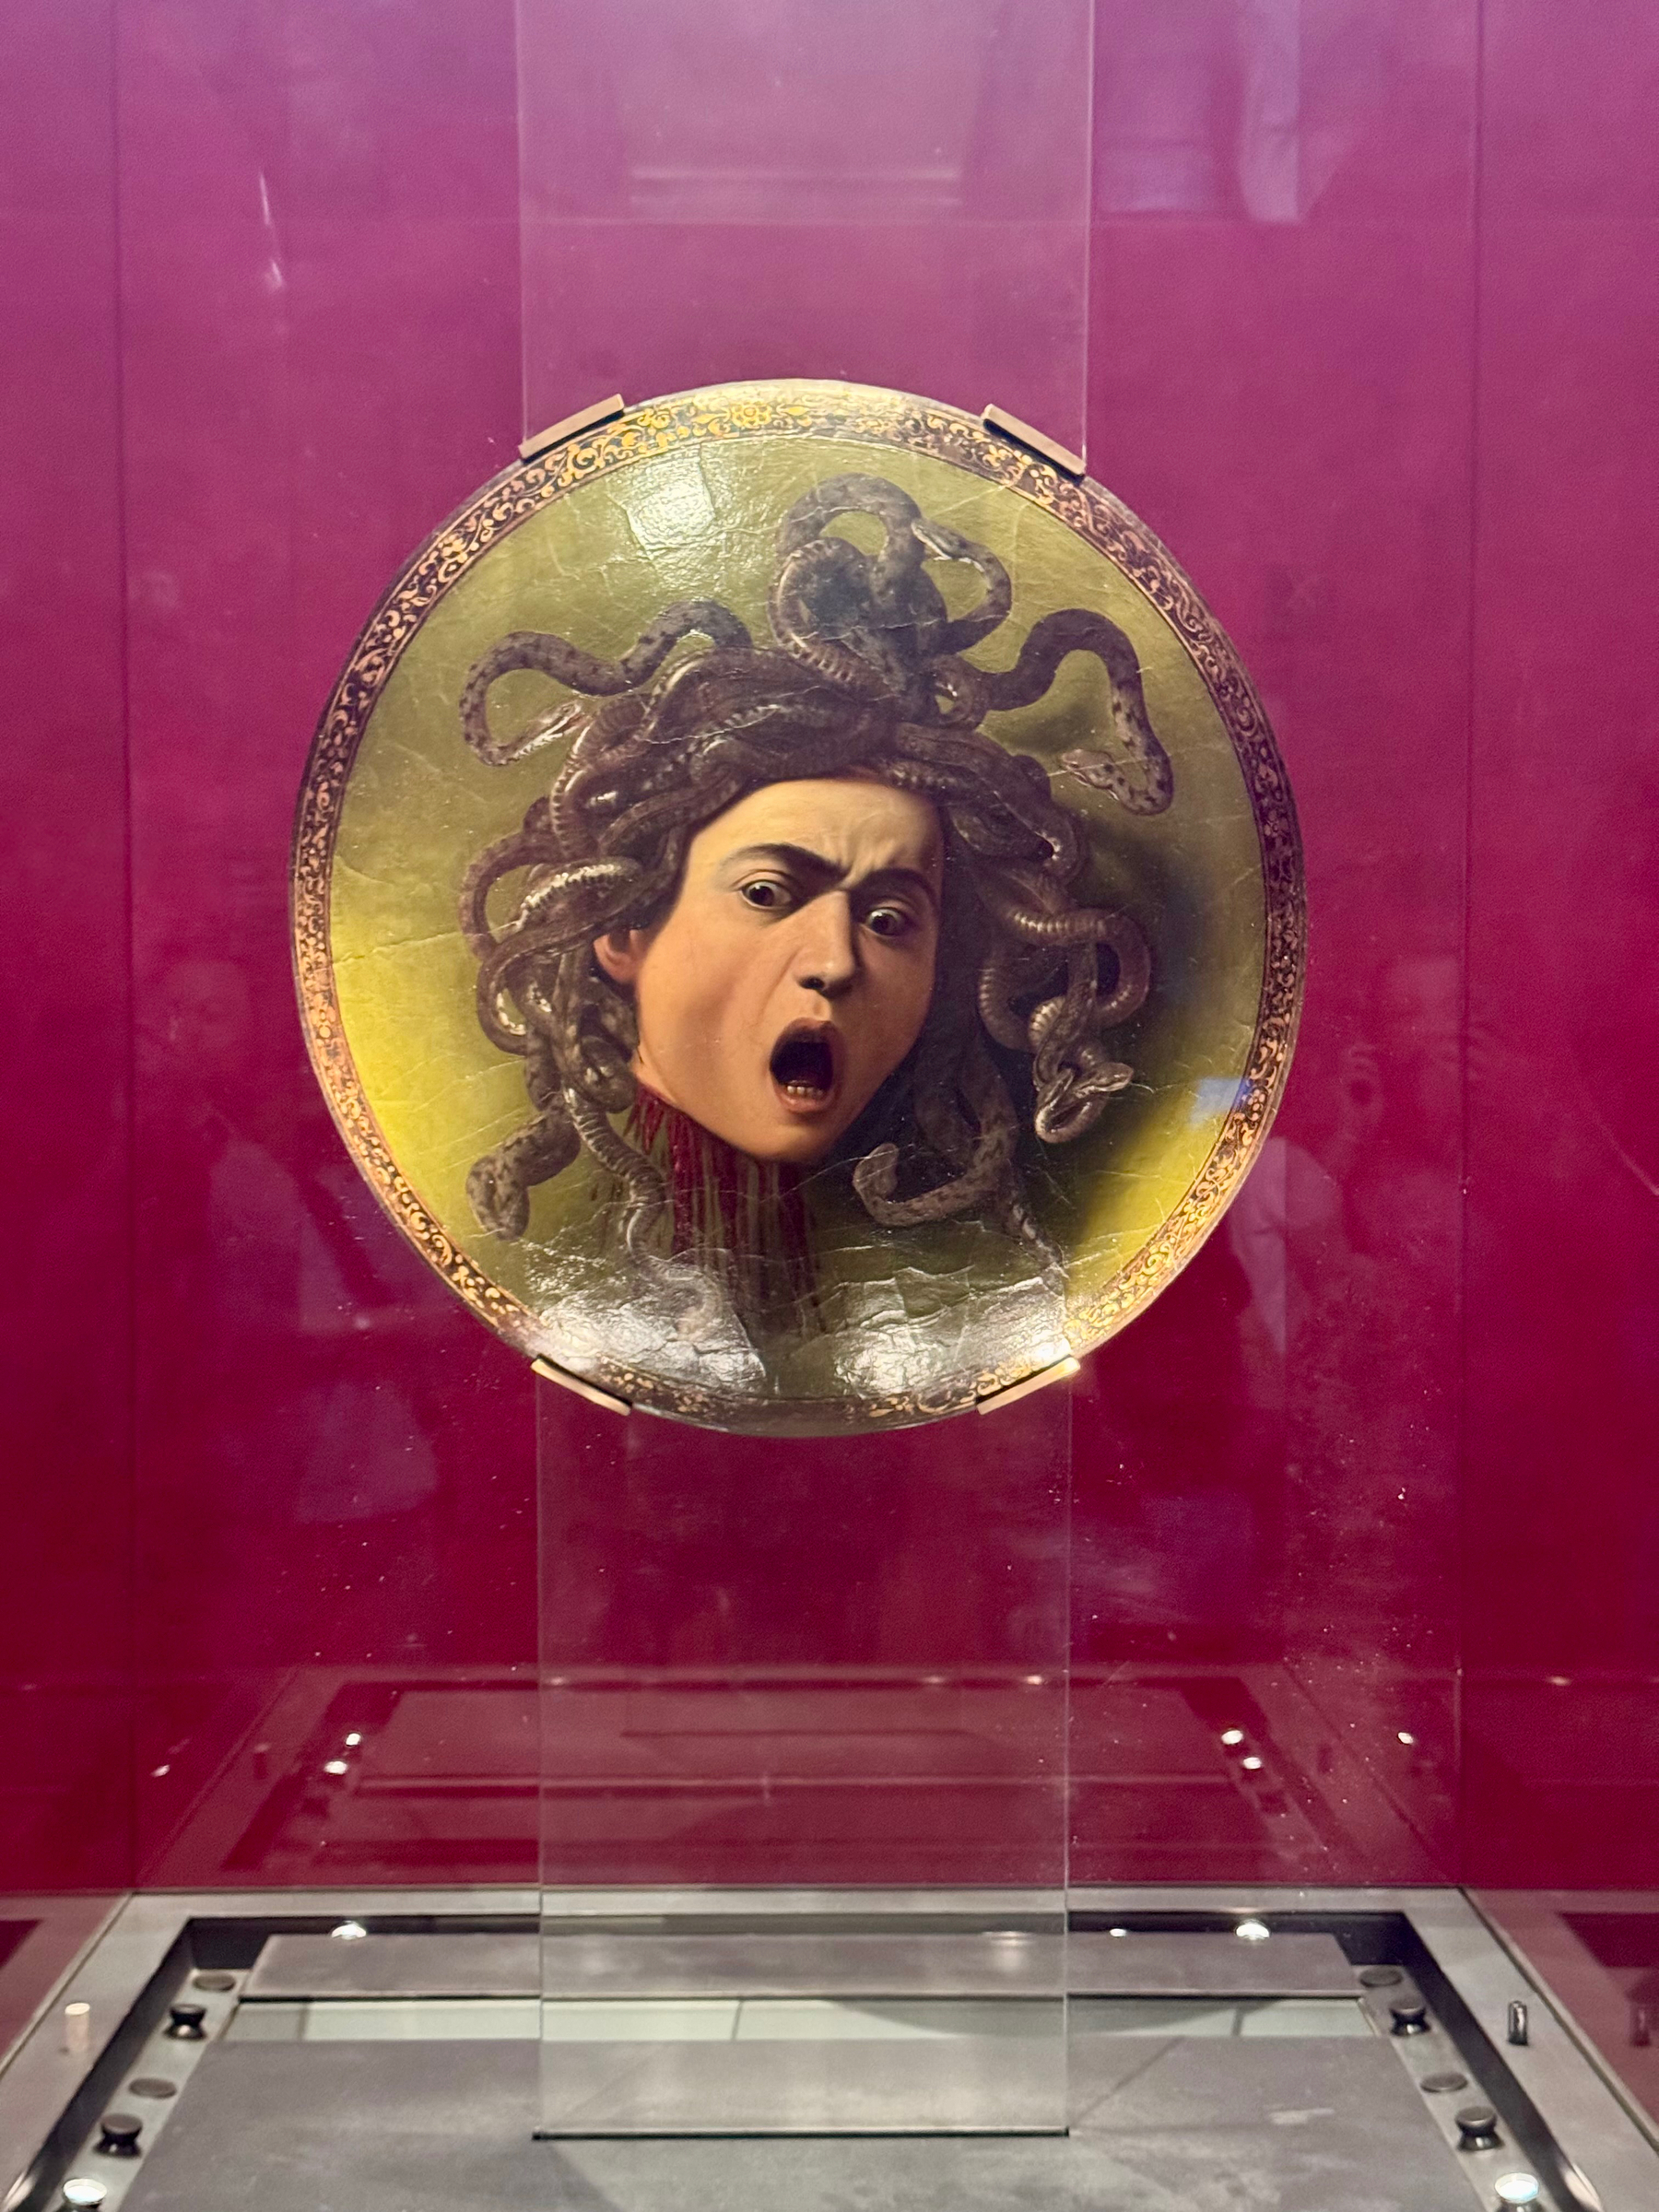 A painting depicting the head of Medusa, with writhing snakes for hair and a pained expression on her face, displayed in a glass case against a red background. The artwork is mounted on a round shield-like surface.